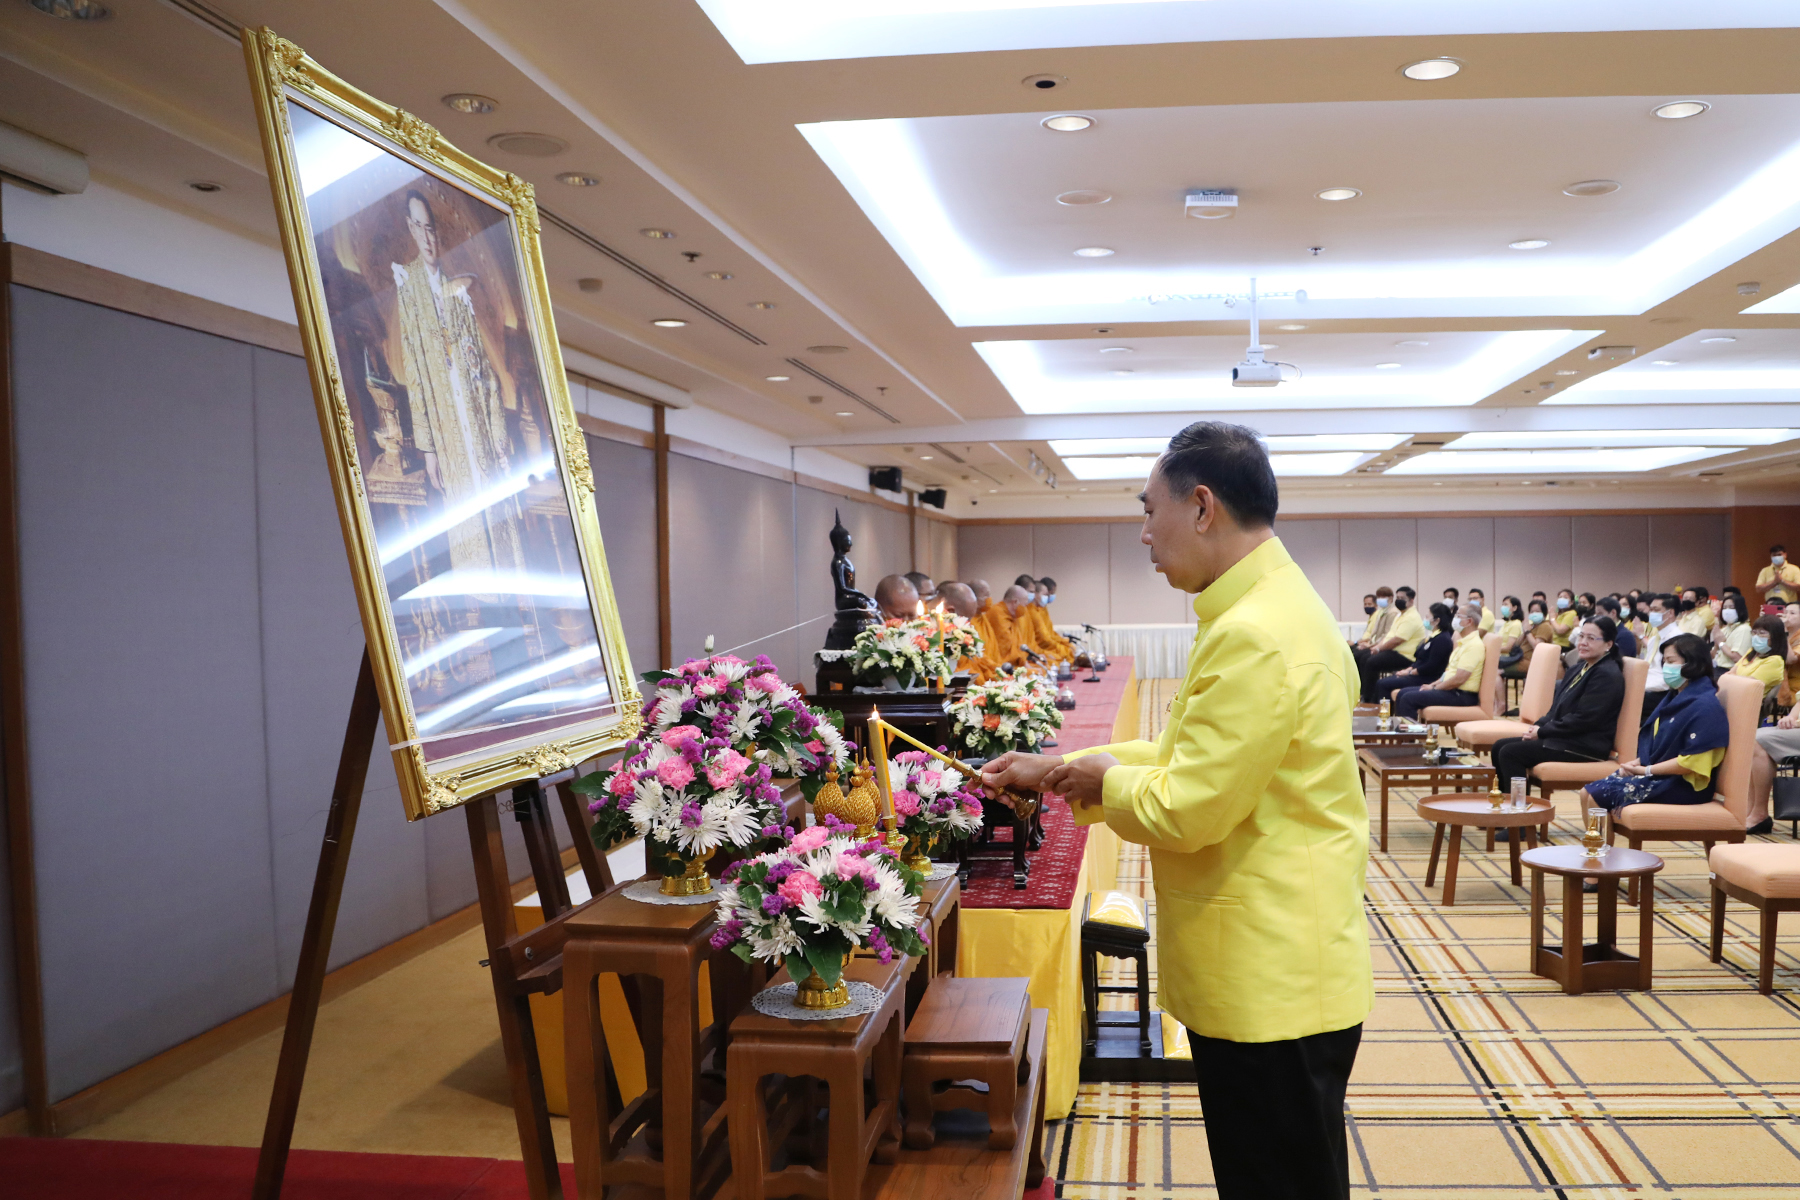 EXIM Thailand Holds Merit-making Ceremony on His Majesty King Bhumibol Adulyadej the Great’s Passing Anniversary